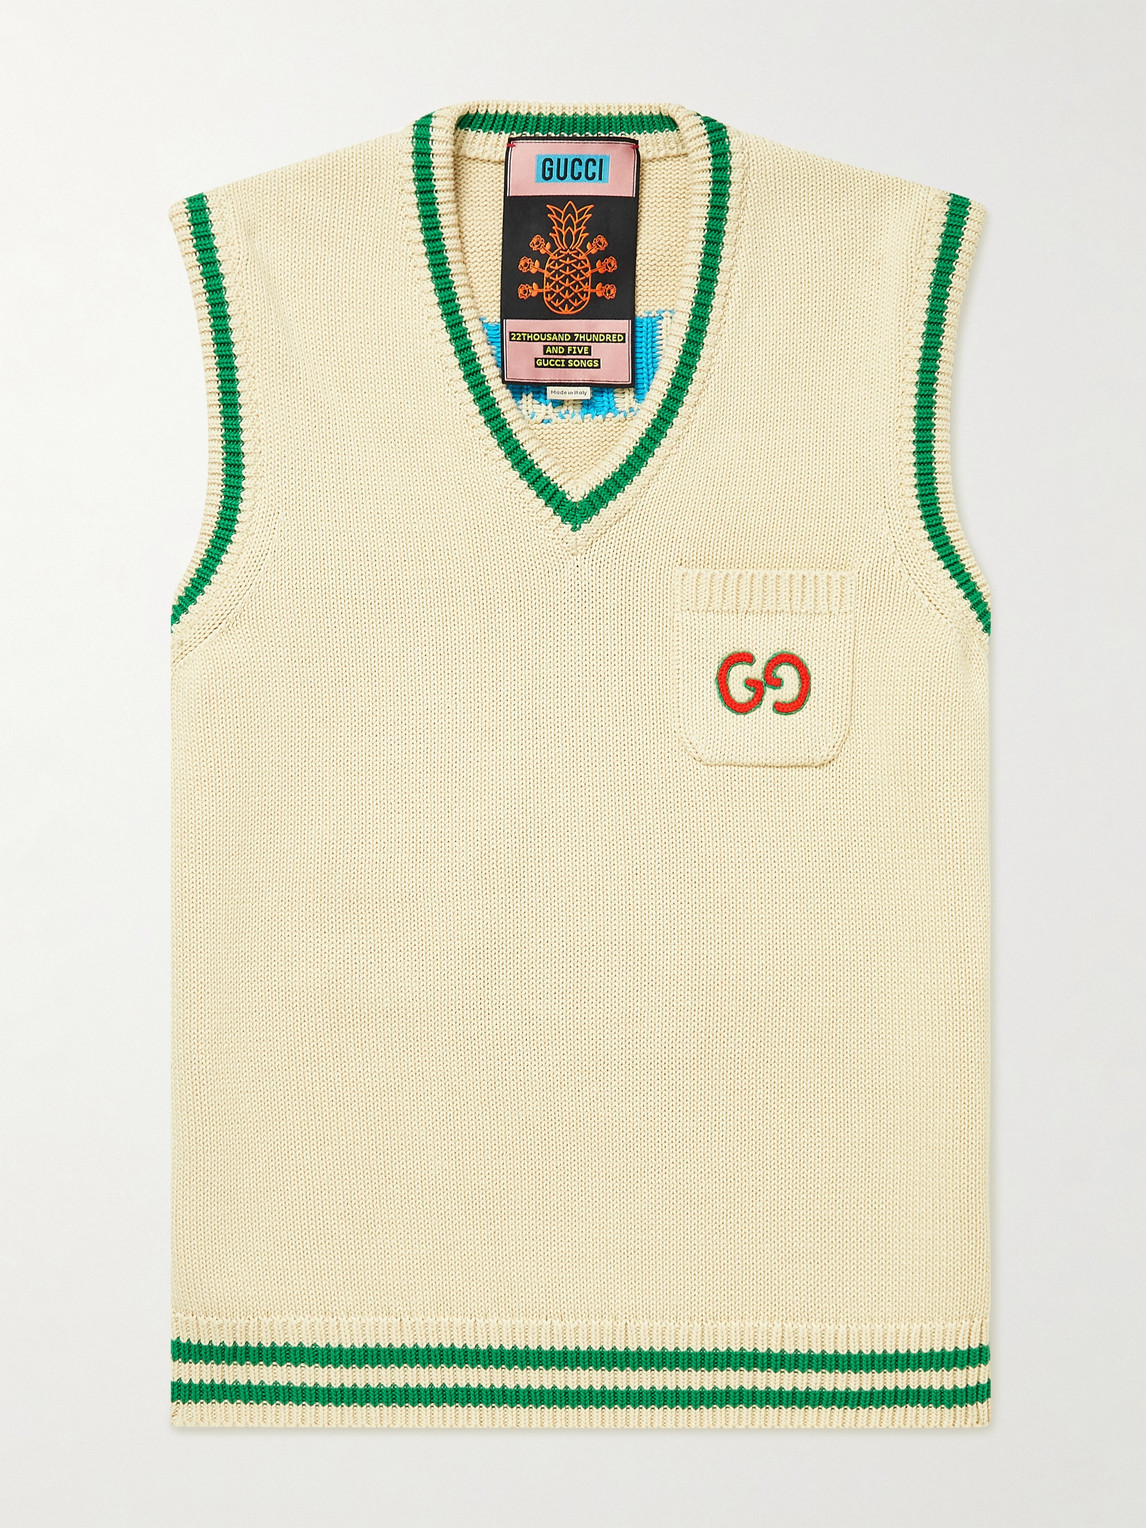 GUCCI EMBROIDERED COTTON-JACQUARD jumper waistcoat